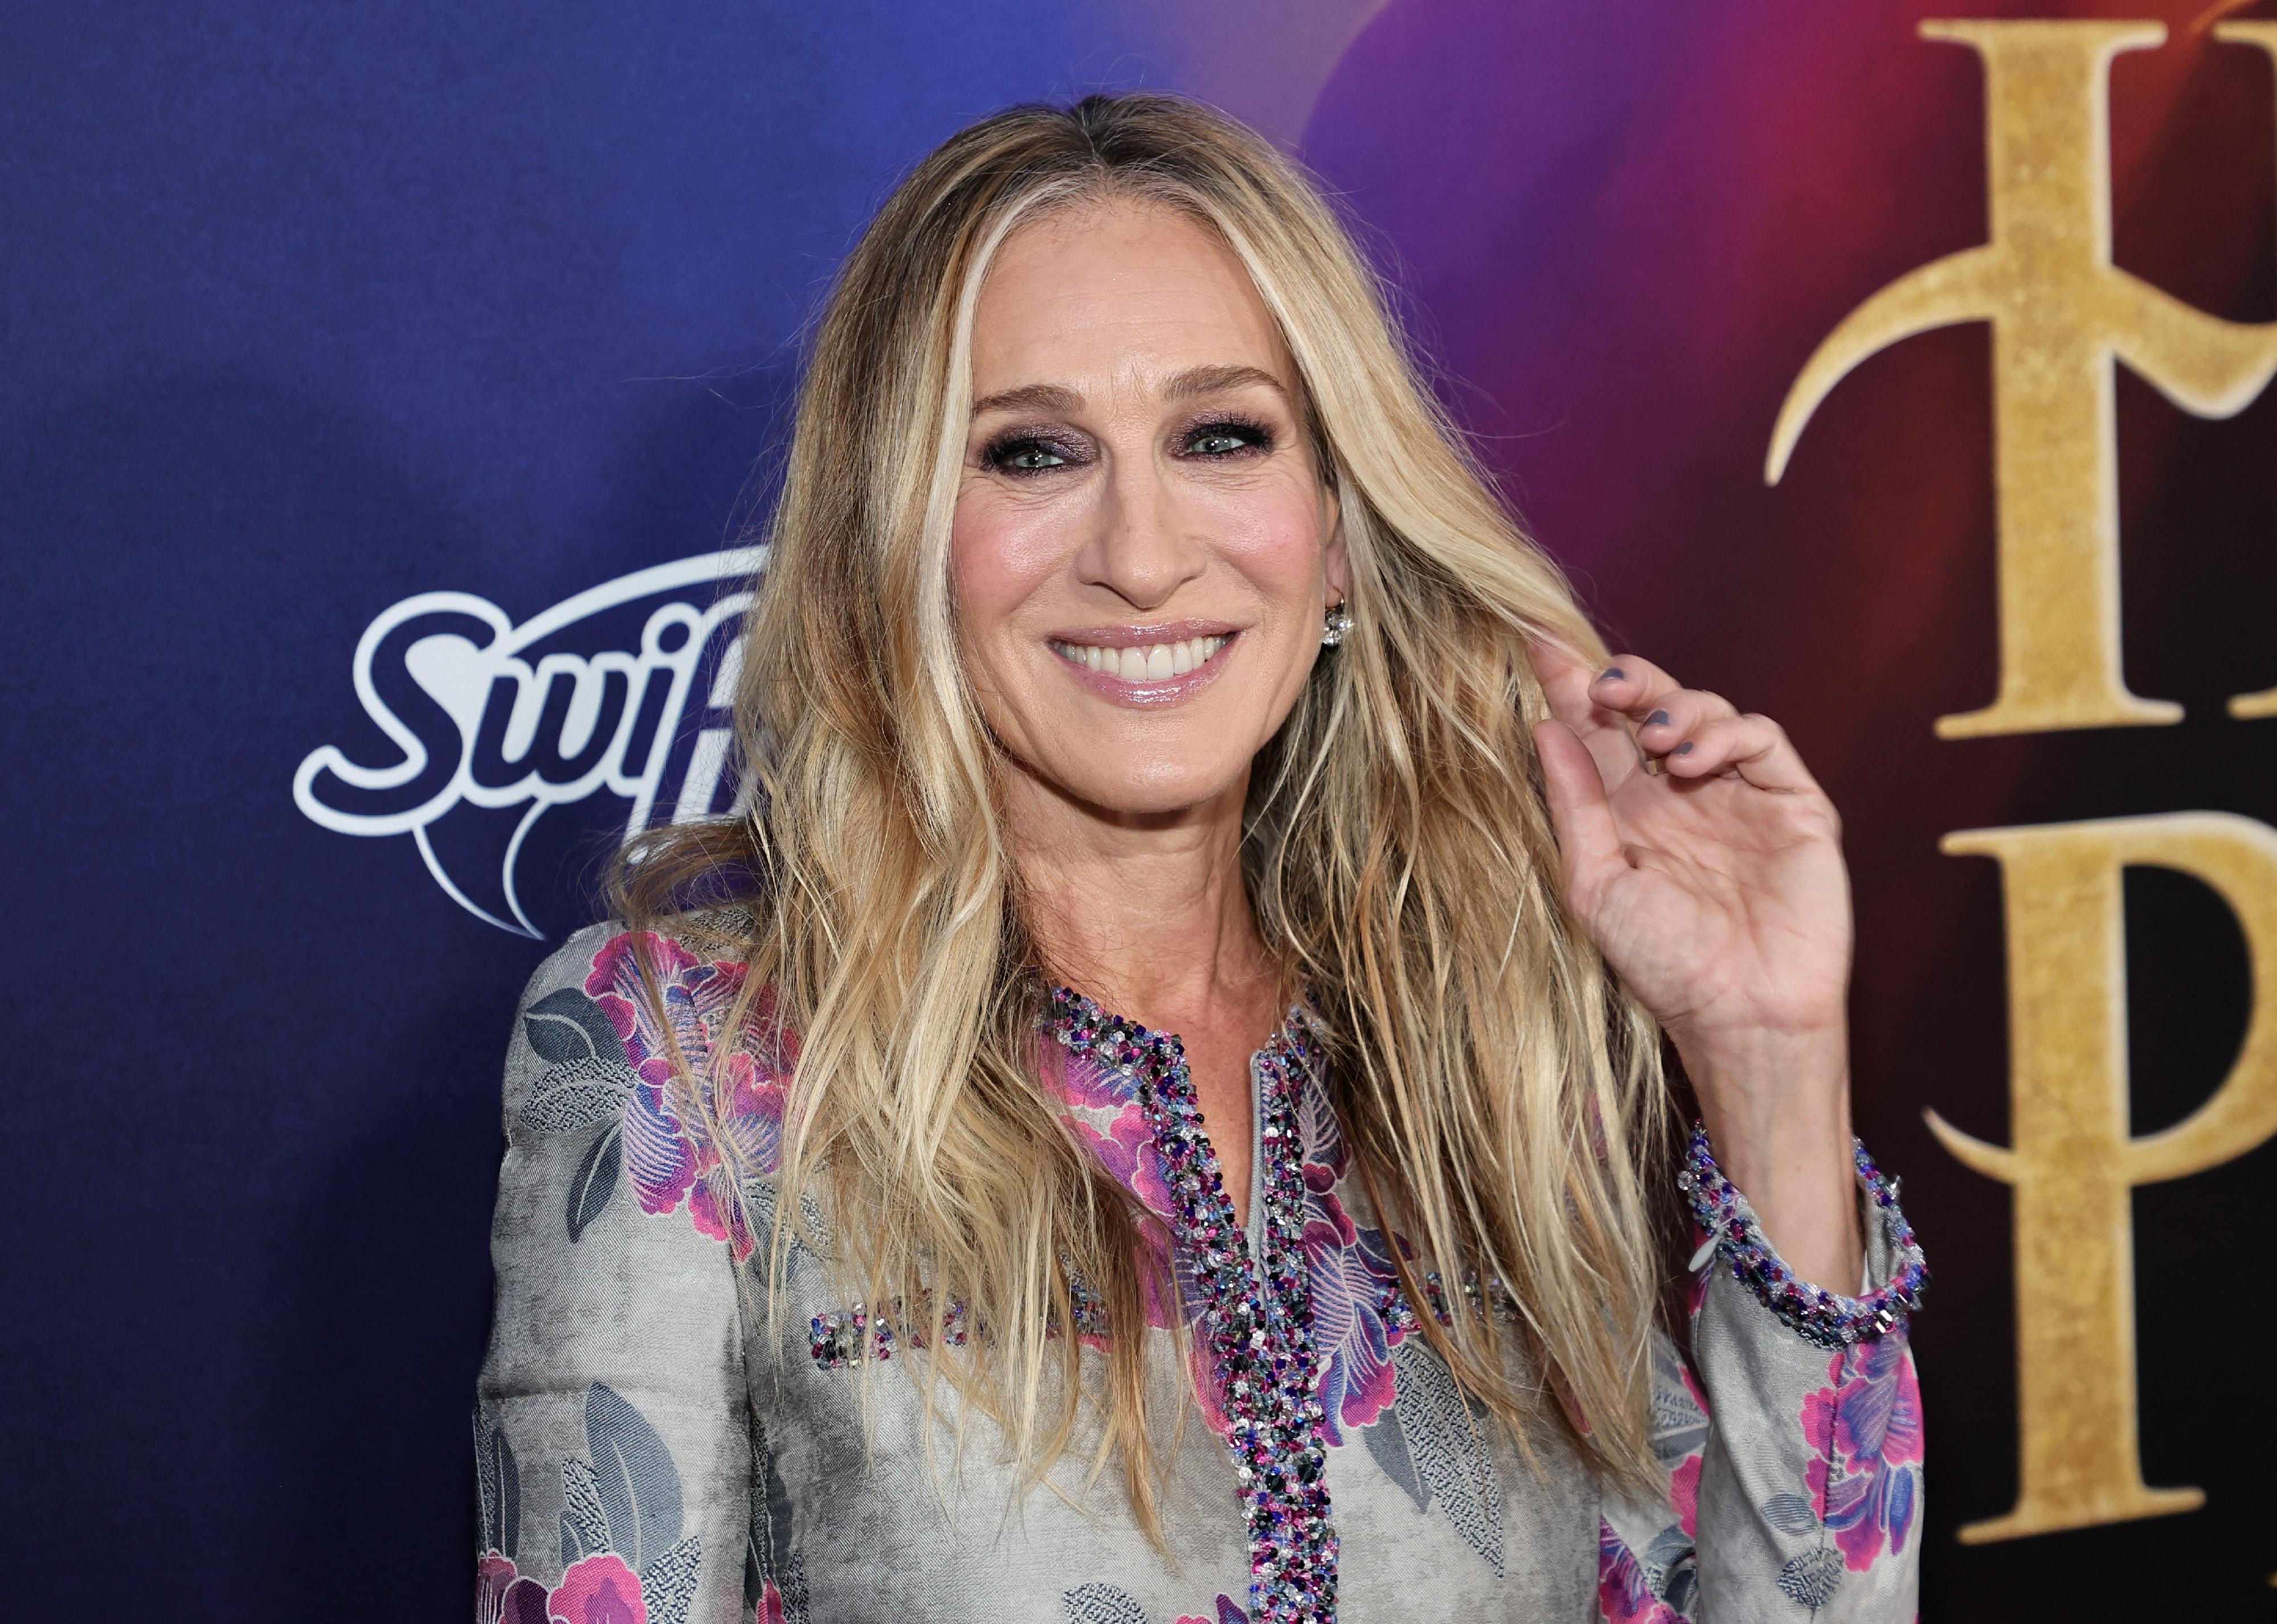 Sarah Jessica Parker in a jacquard top with pink-and-purple sequin detailing.